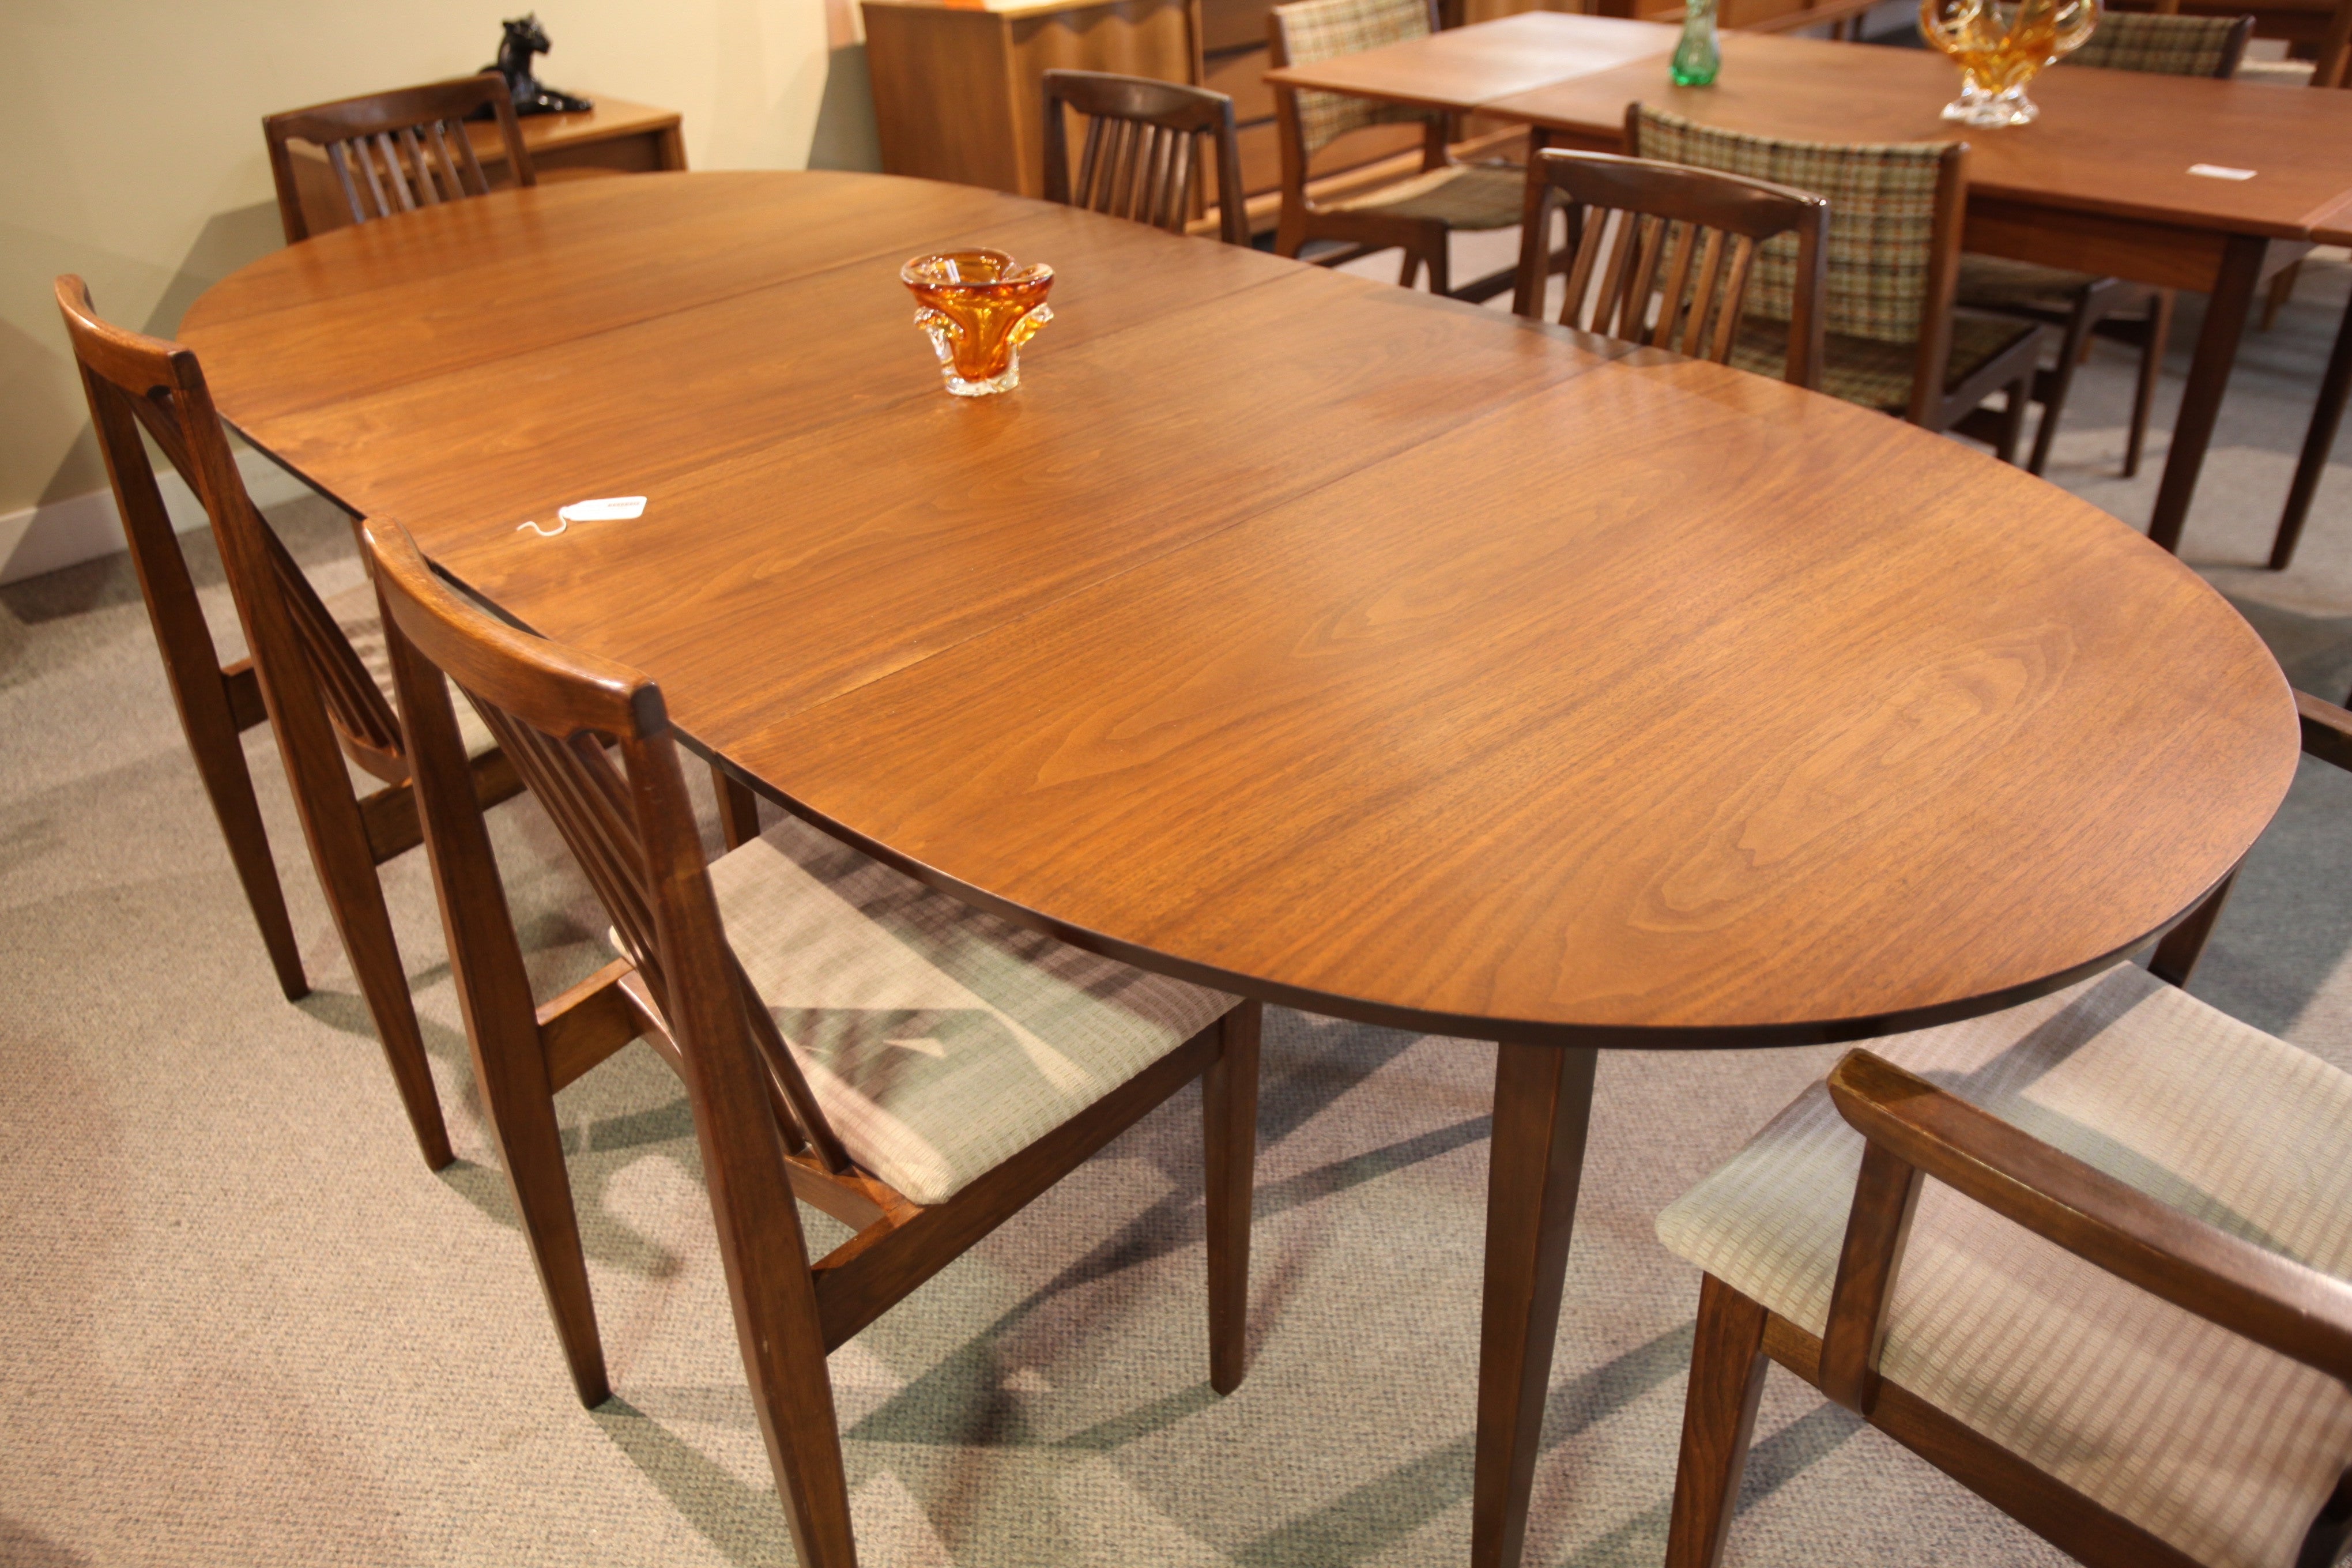 Honderich Walnut table with 6 Chairs. (2 extensions) 92" x 41.50" or 67.50 x 41.50